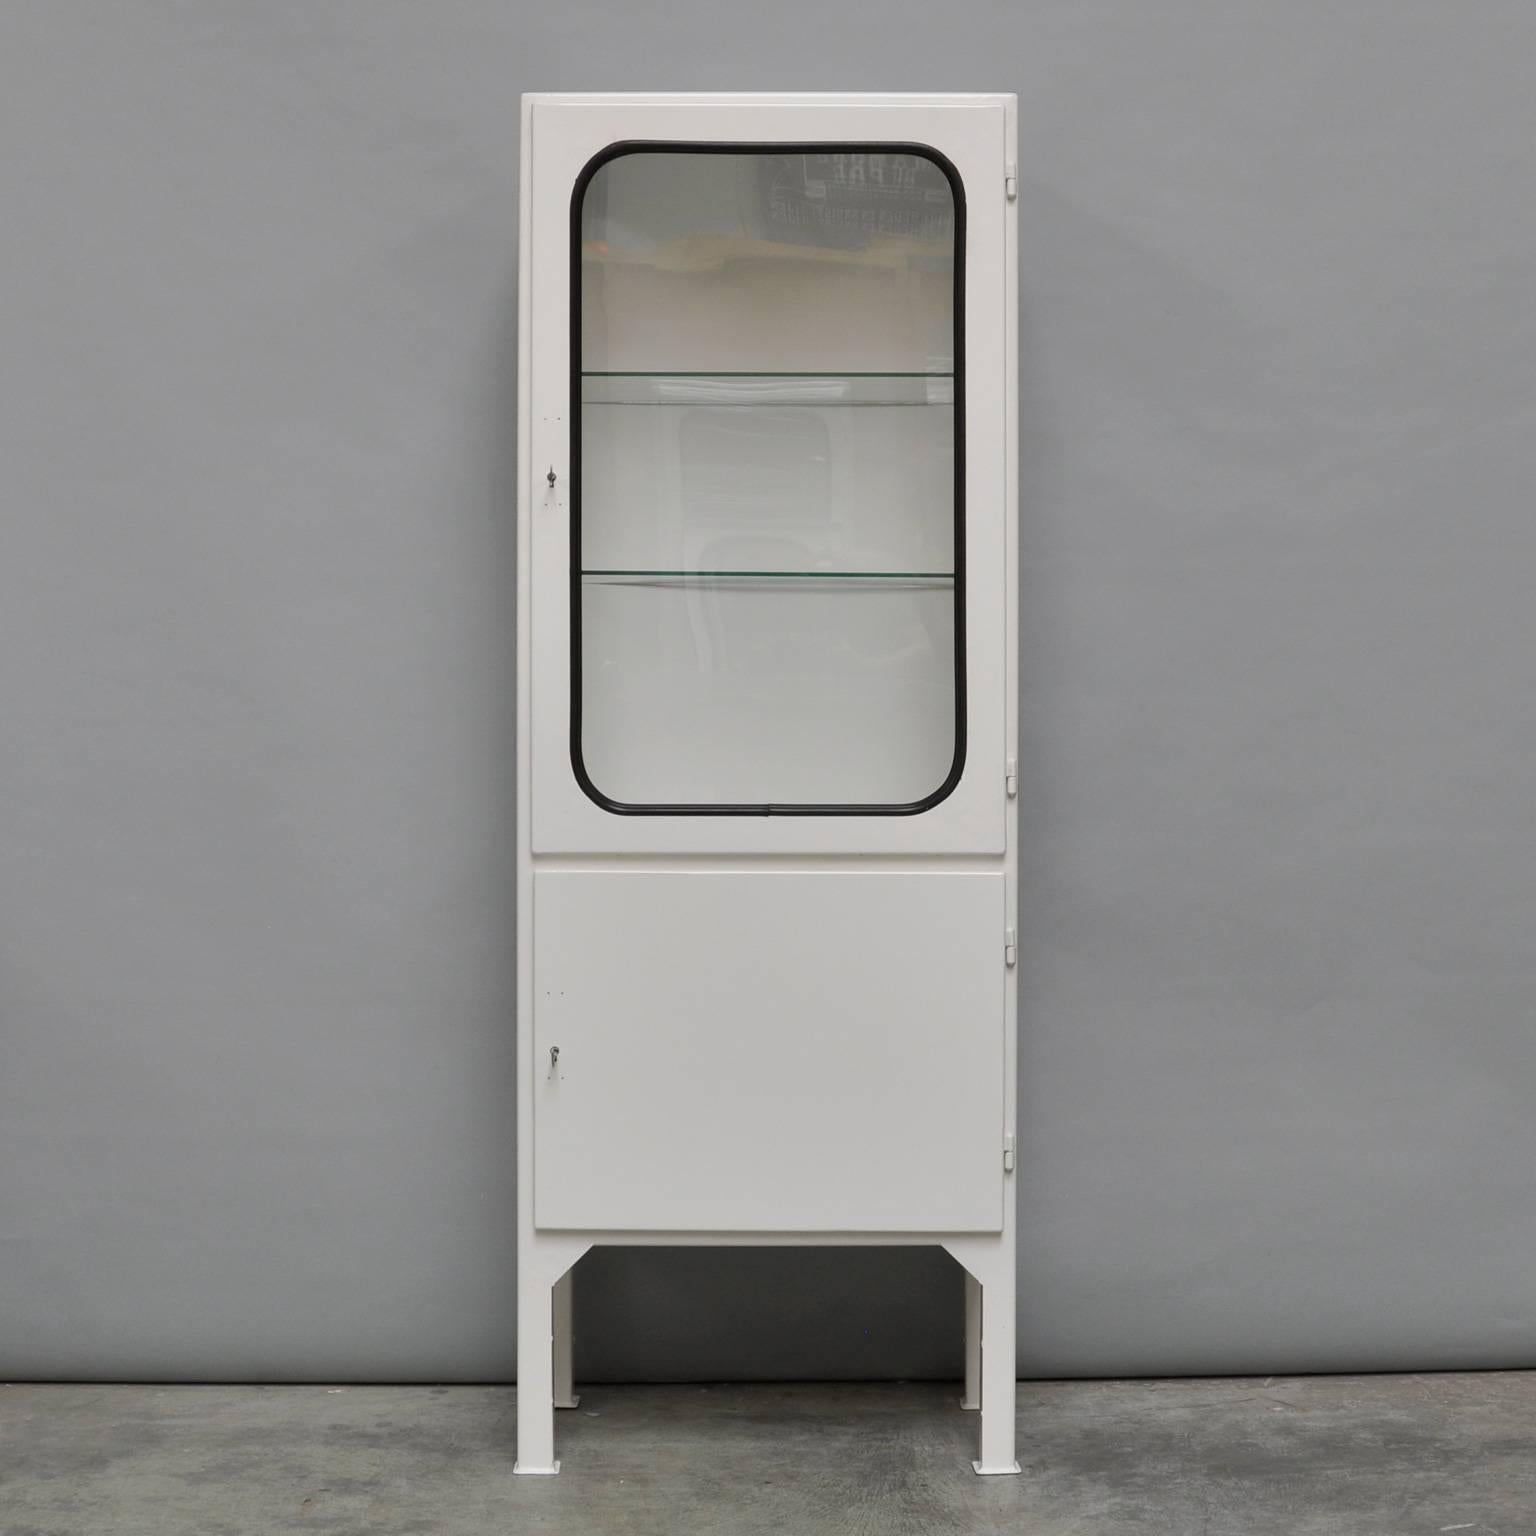 This medicine cabinet was designed in the 1960s and produced in the 1970s in Hungary. It is made from steel and antique glass and the glass is held by a black rubber strip. The cabinet comes with two (new) adjustable glass shelves and functioning